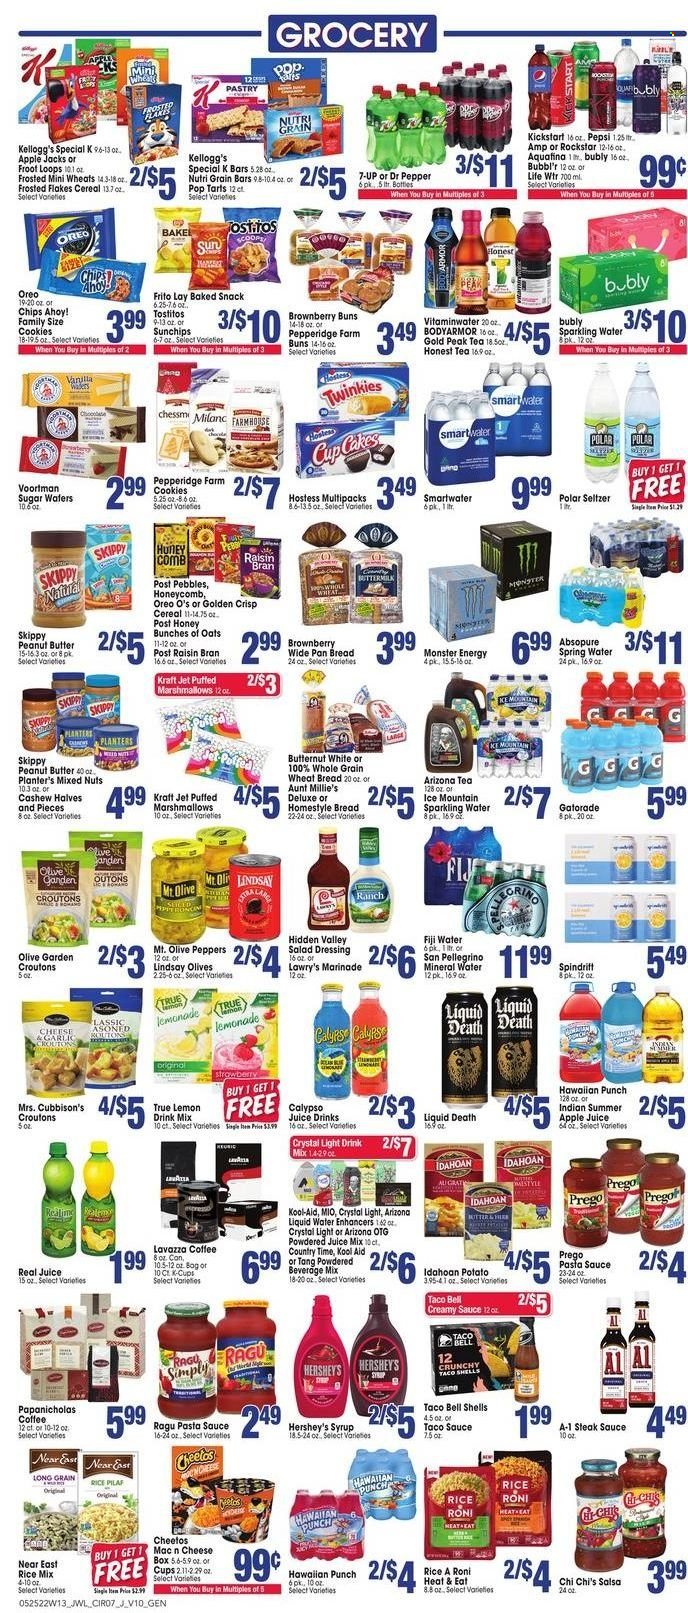 thumbnail - Jewel Osco Flyer - 05/25/2022 - 05/31/2022 - Sales products - wheat bread, buns, peppers, pasta sauce, sauce, Kraft®, ragú pasta, Oreo, buttermilk, Hershey's, cookies, marshmallows, snack, Kellogg's, Pop-Tarts, Chips Ahoy!, Cheetos, chips, Tostitos, croutons, sugar, olives, cereals, Frosted Flakes, Raisin Bran, Nutri-Grain, salad dressing, steak sauce, taco sauce, dressing, salsa, marinade, ragu, peanut butter, syrup, mixed nuts, Planters, apple juice, lemonade, Pepsi, juice, Monster, Dr. Pepper, 7UP, Monster Energy, AriZona, Gold Peak Tea, Country Time, Spindrift, Rockstar, Gatorade, Aquafina, mineral water, seltzer water, spring water, sparkling water, Ice Mountain, Smartwater, San Pellegrino, tea, coffee, coffee capsules, K-Cups, Lavazza, steak, Dove, Jet, comb, pan, butternut squash. Page 7.